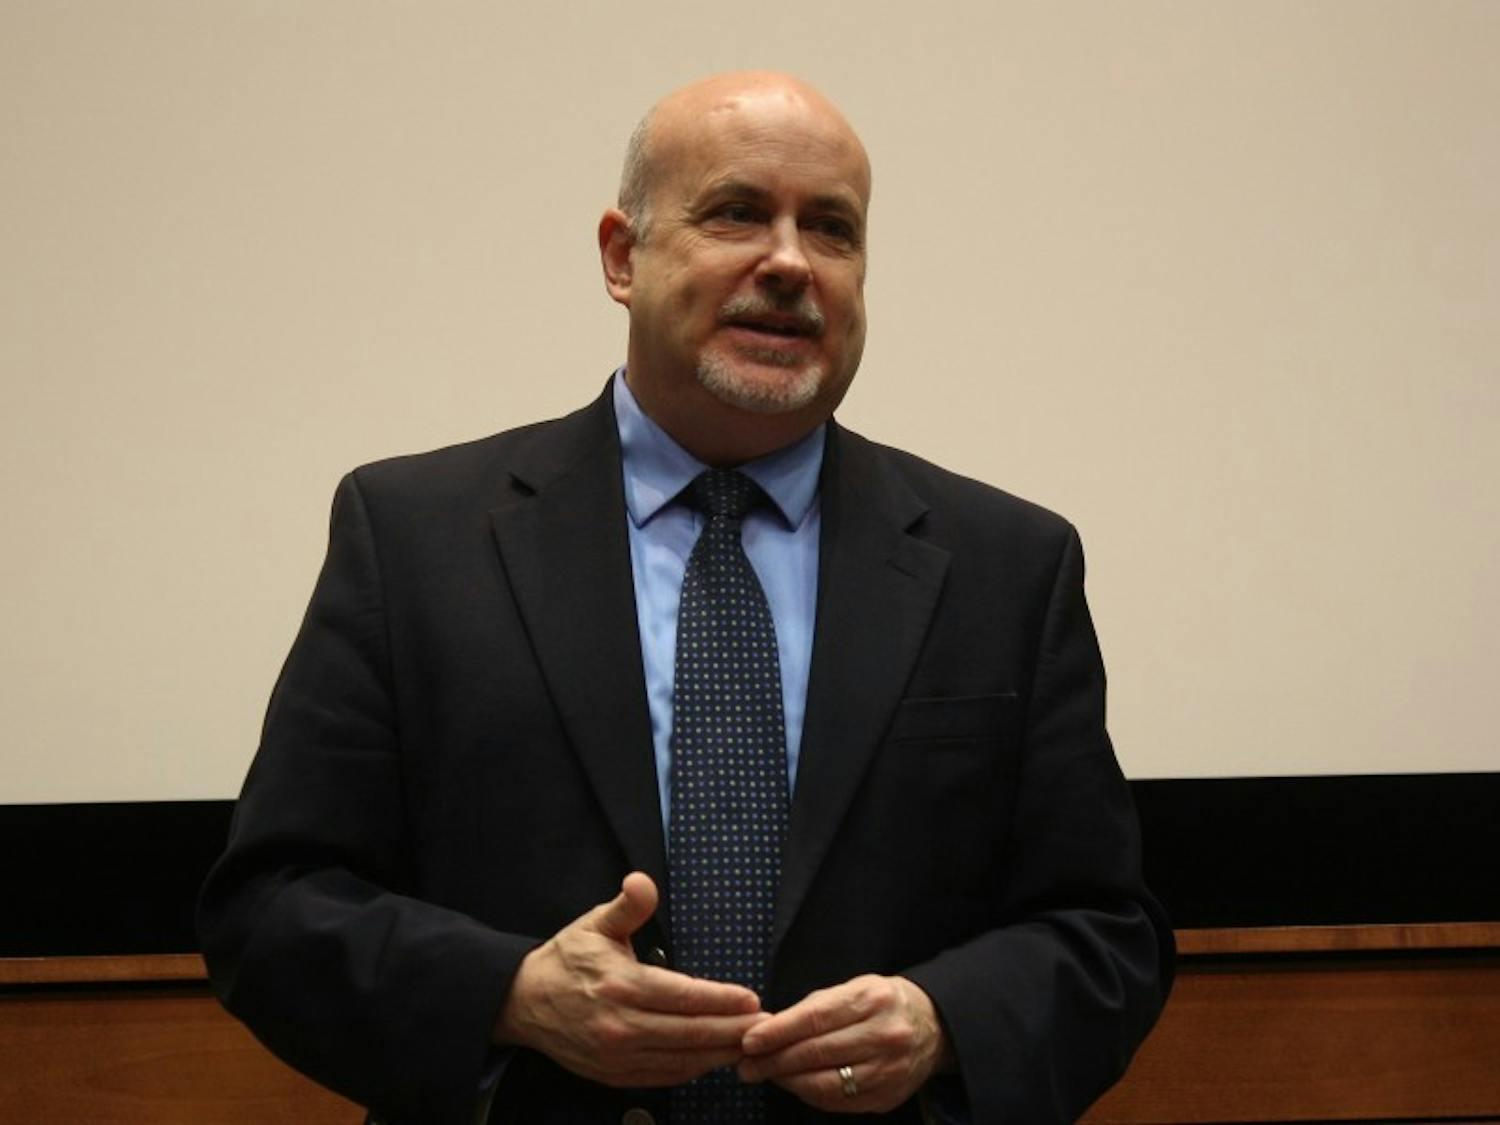 U.S. Rep. Mark Pocan, D-Black Earth, submitted a request Friday for more information on the U.S. Immigration and Customs Enforcement raids in Wisconsin that led to the arrest of 83 individuals after meeting with officials did not yield enough answers.